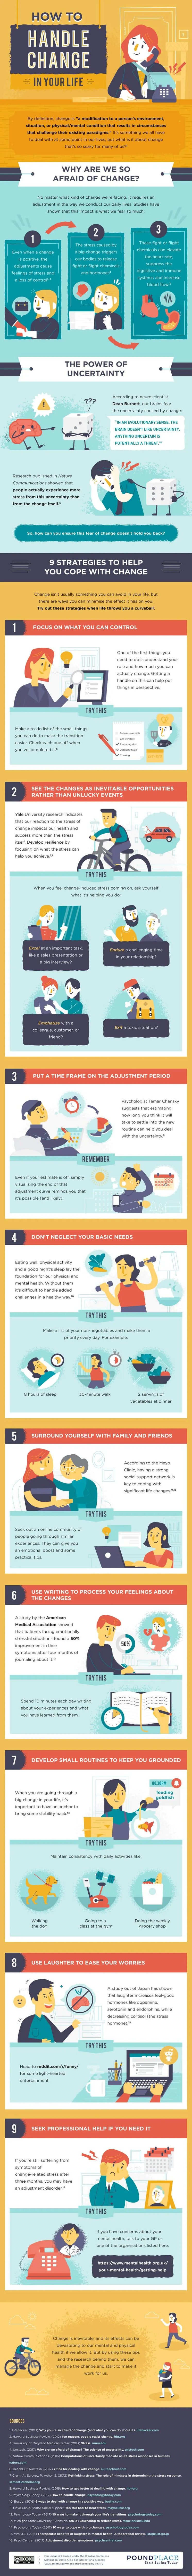 How To Handle Change In Your Life - #infographic